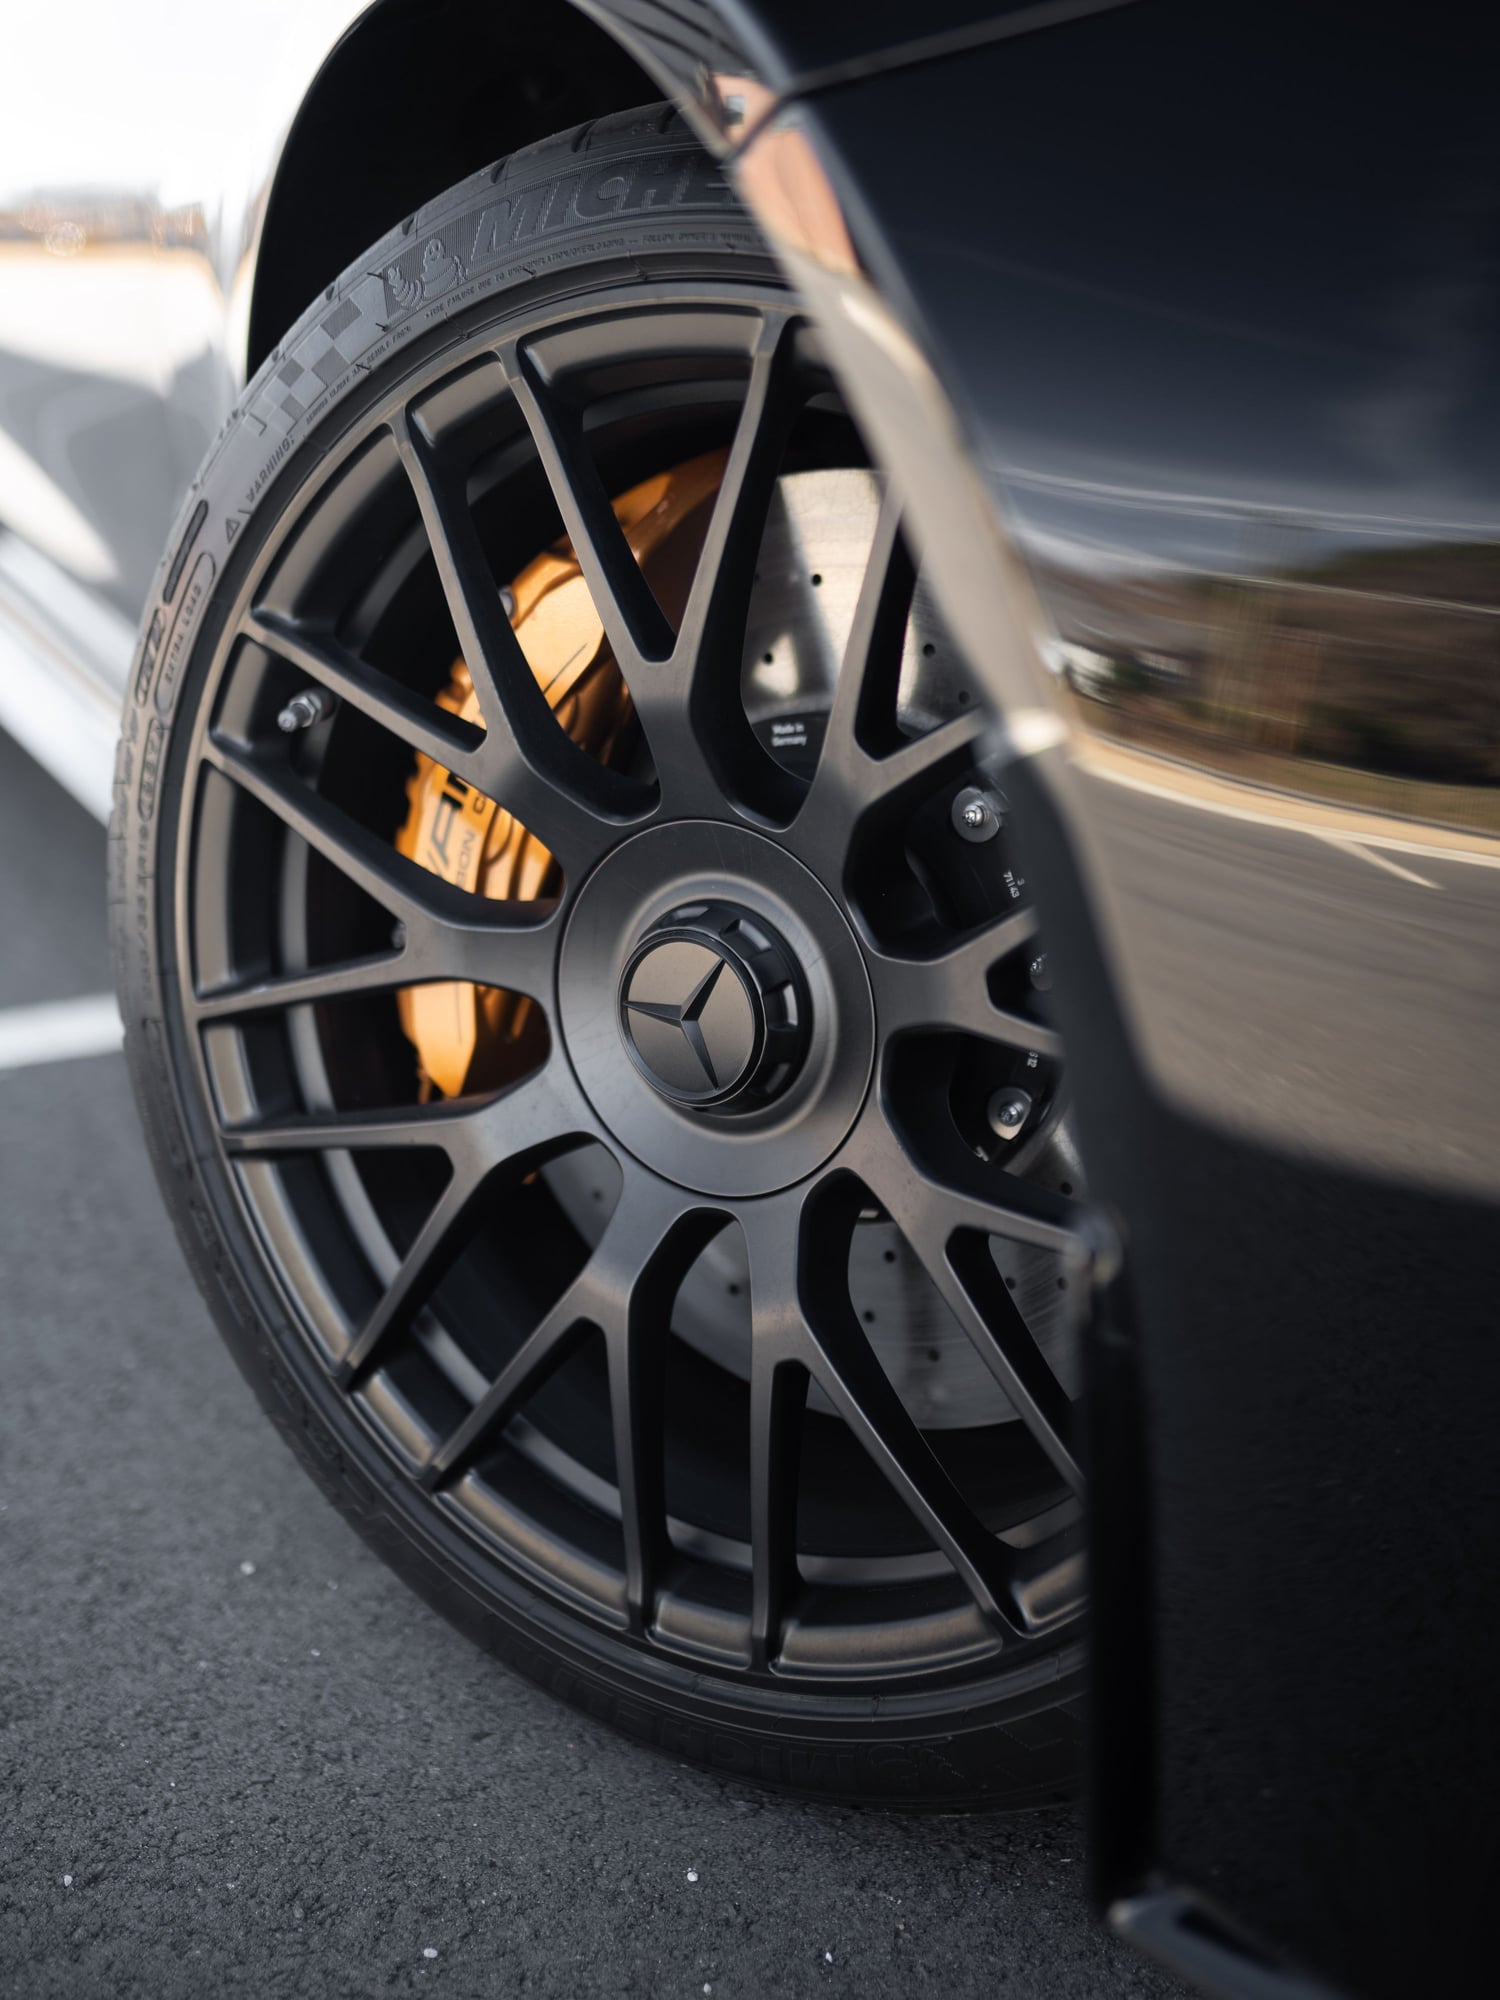 Wheels and Tires/Axles - Mercedes C63 AMG Michelin Cup 2 TIRES 255/35/19 & 285/30/20 Delivery Miles - New - 2017 to 2021 Mercedes-Benz C63 AMG S - Charlotte, NC 28202, United States